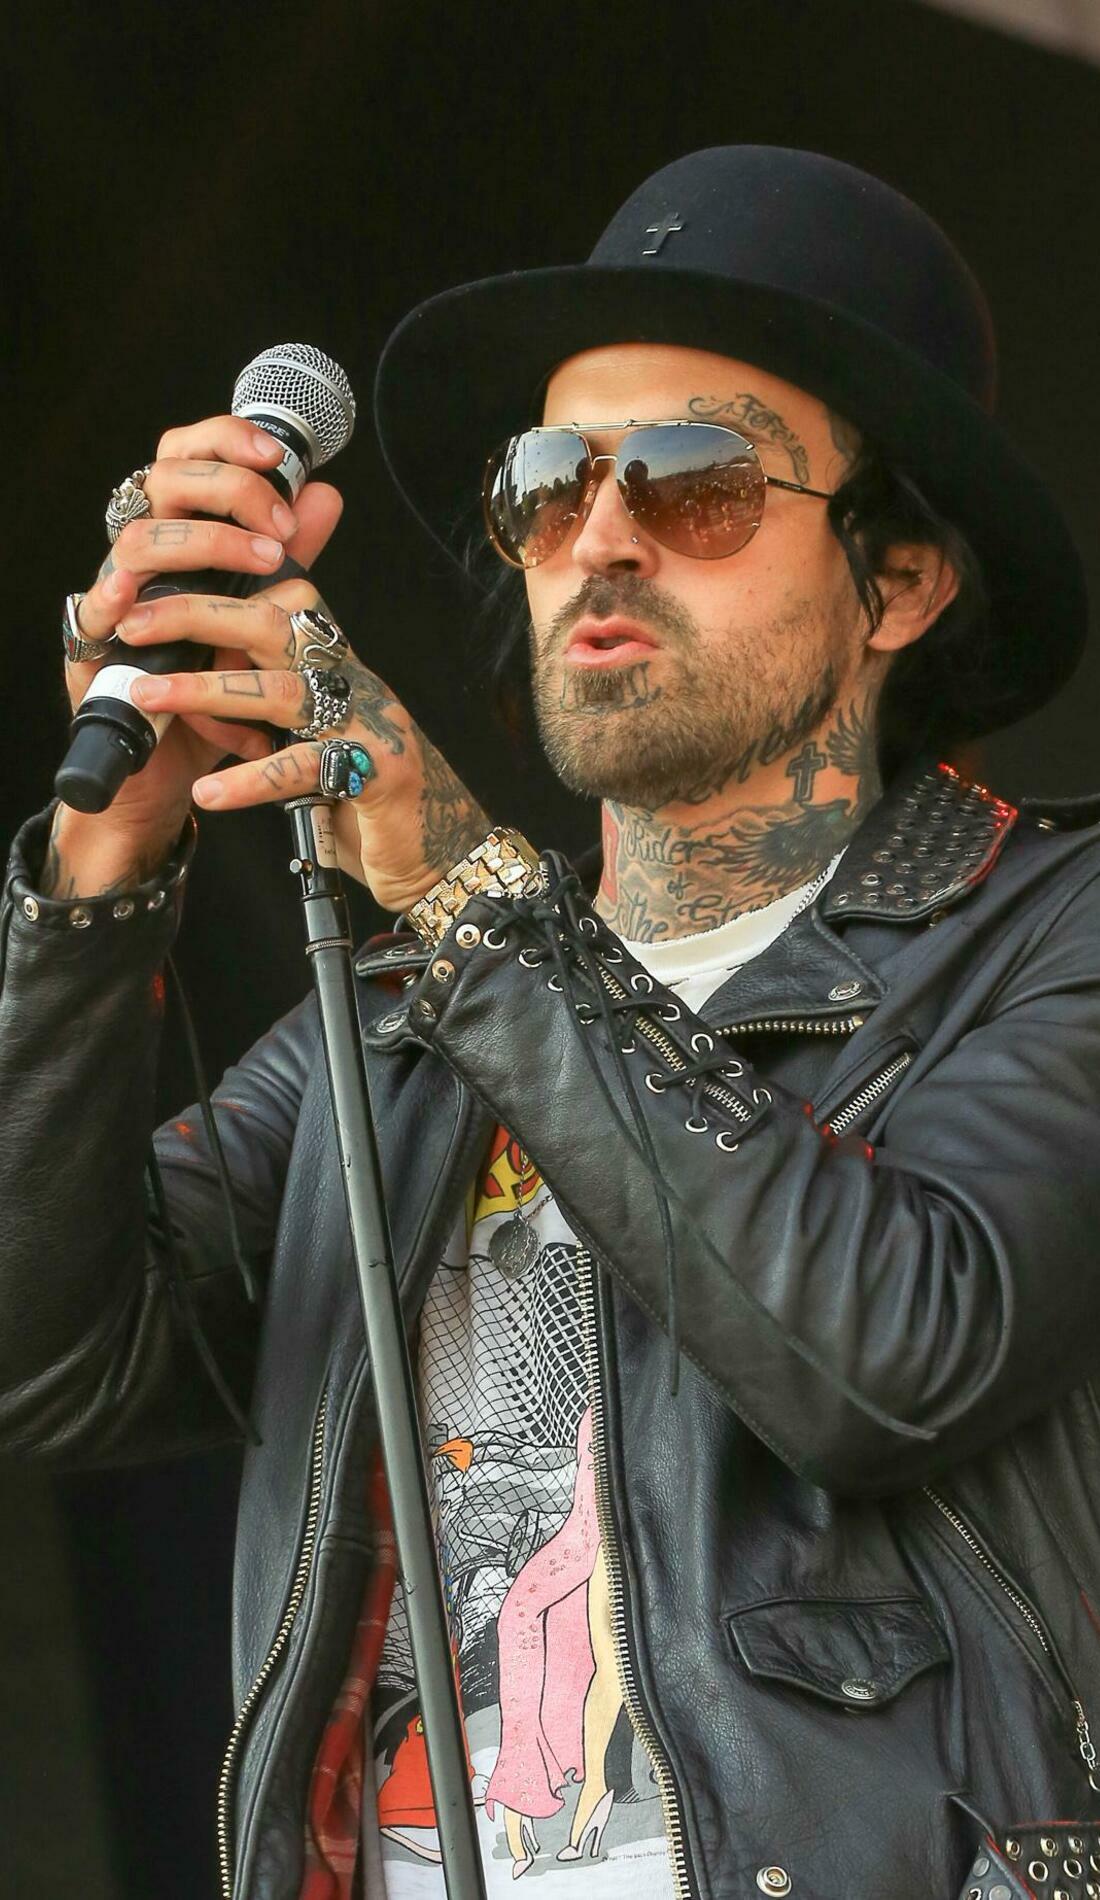 A Yelawolf live event